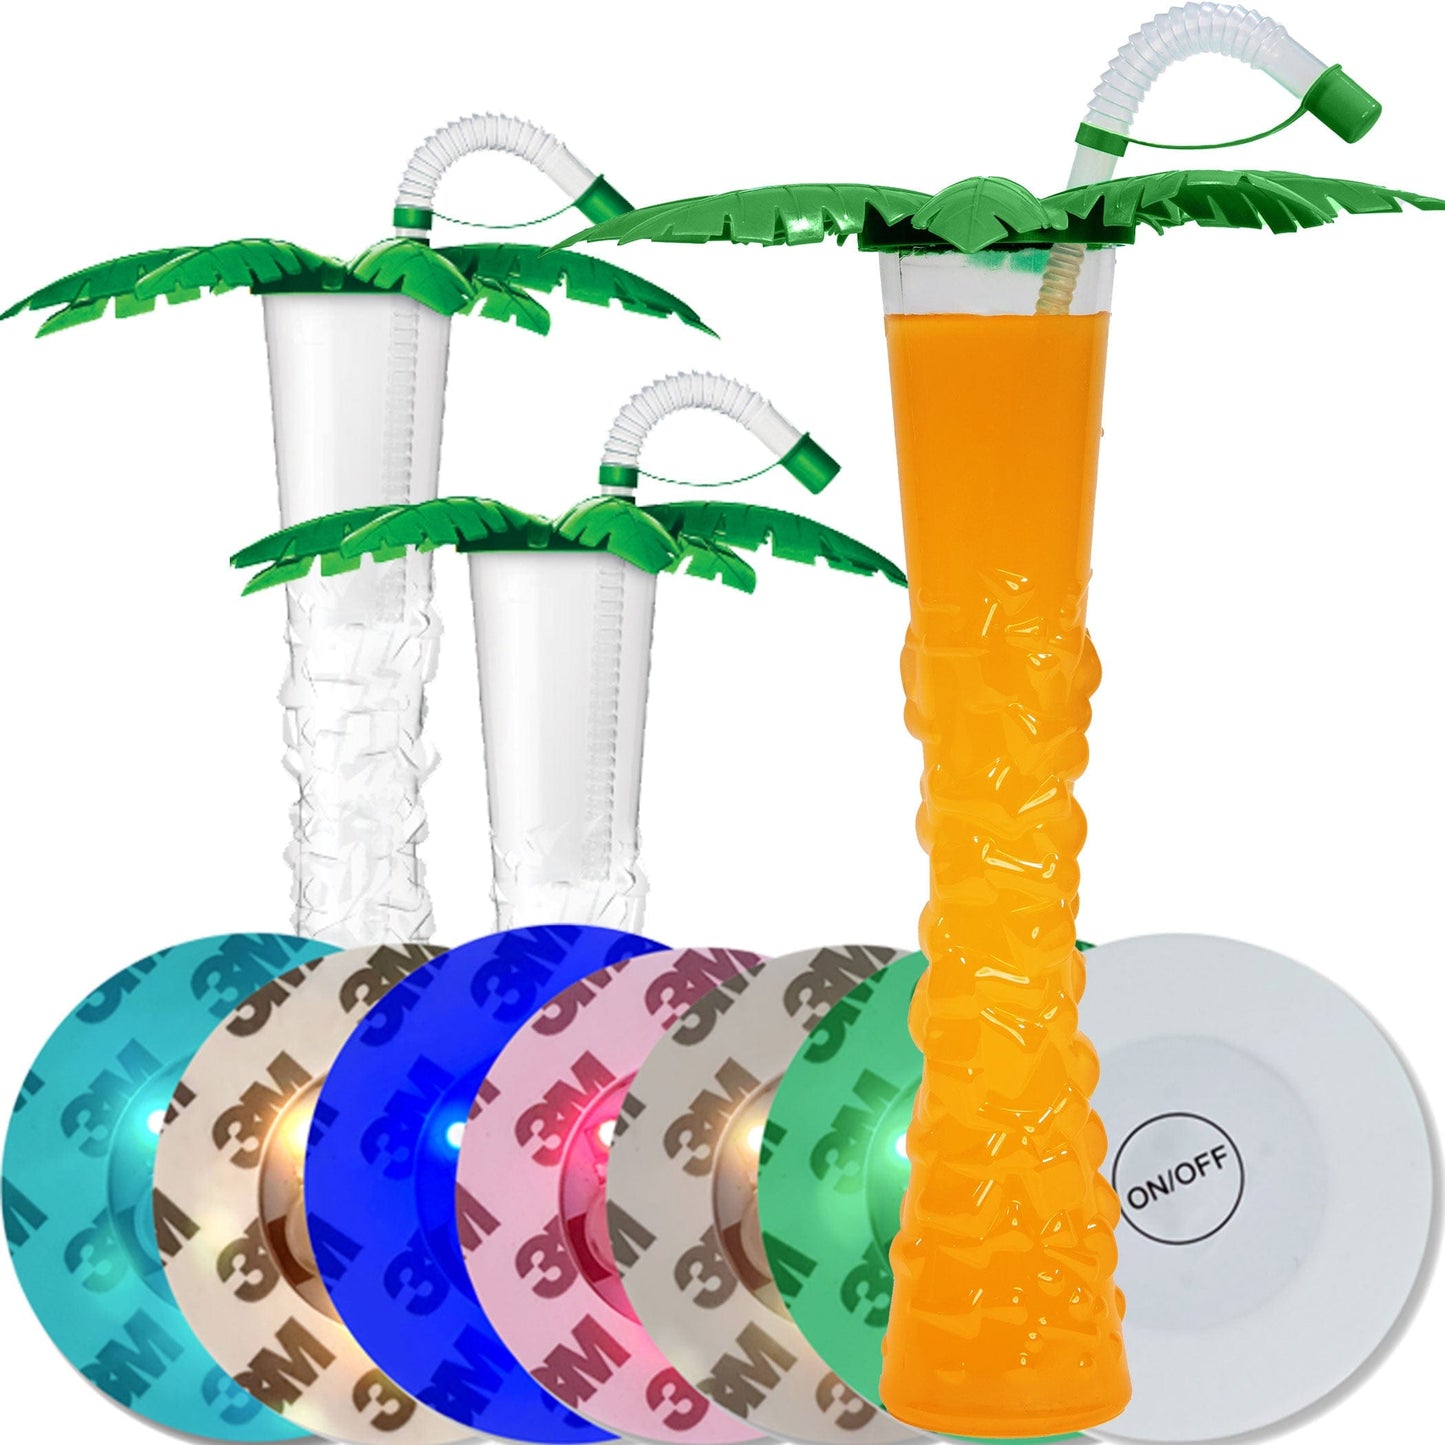 Sweet World USA Yard Cups Palm Tree Yard Cups with LED Coasters - 17 oz. (54 Cups) - with Green Palm Lids and Straws cups with lids and straws